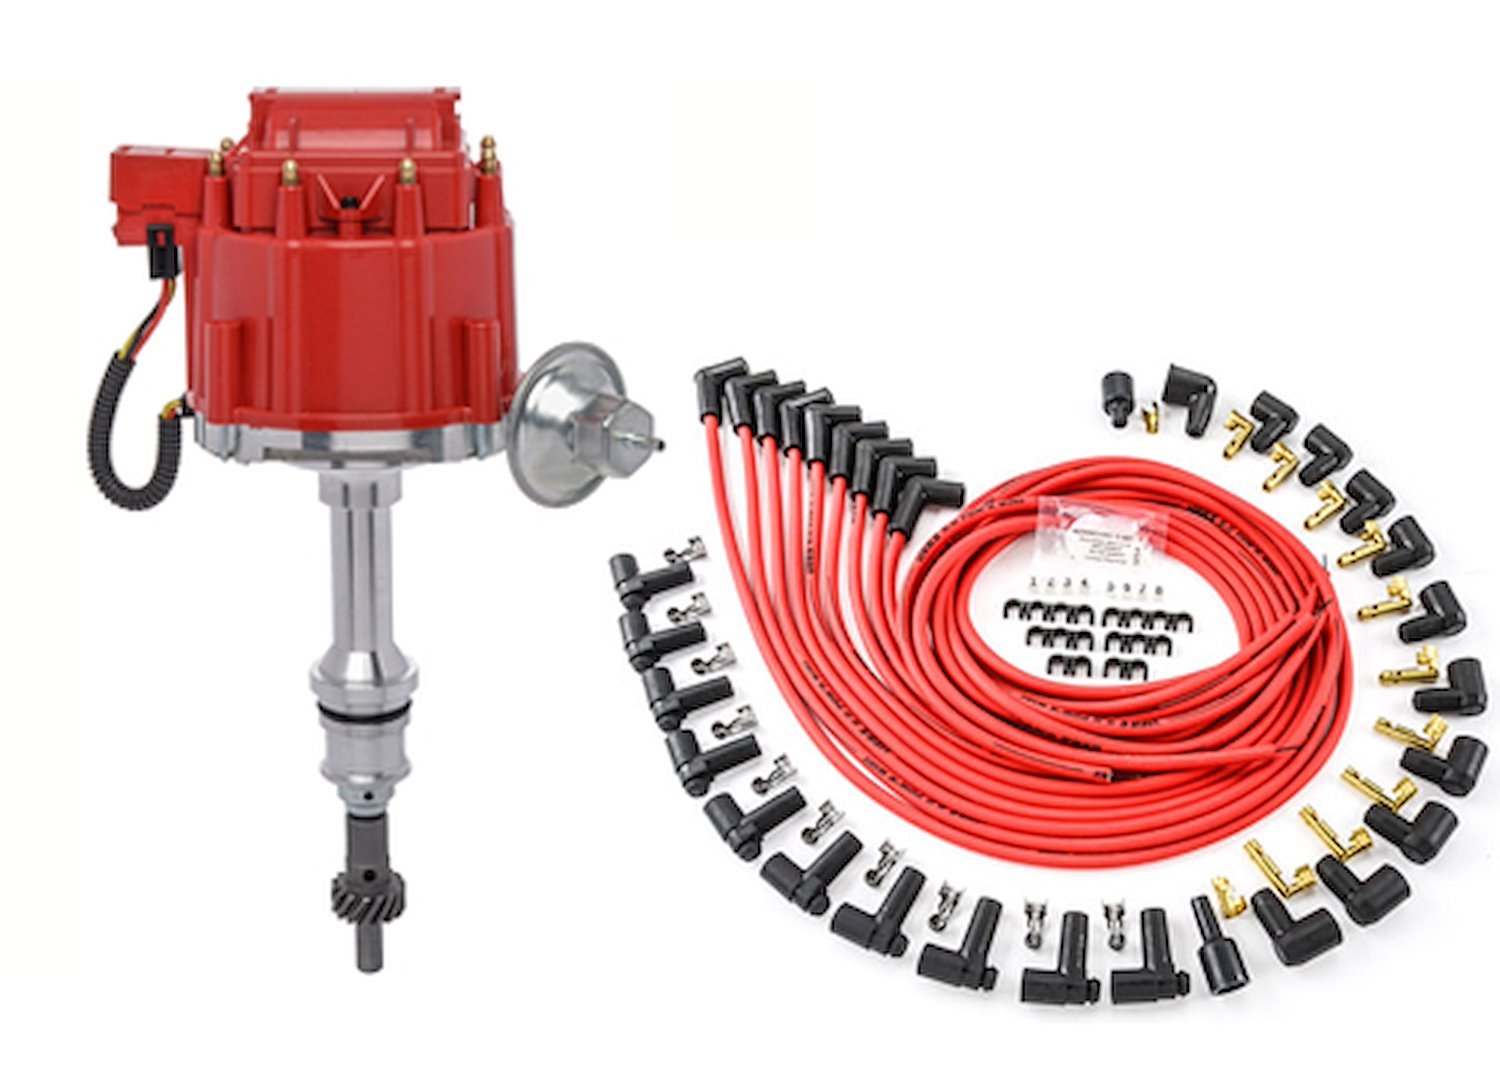 HEI Distributor and Spark Plug Wire Kit [Small Block Ford 221-302 V8]